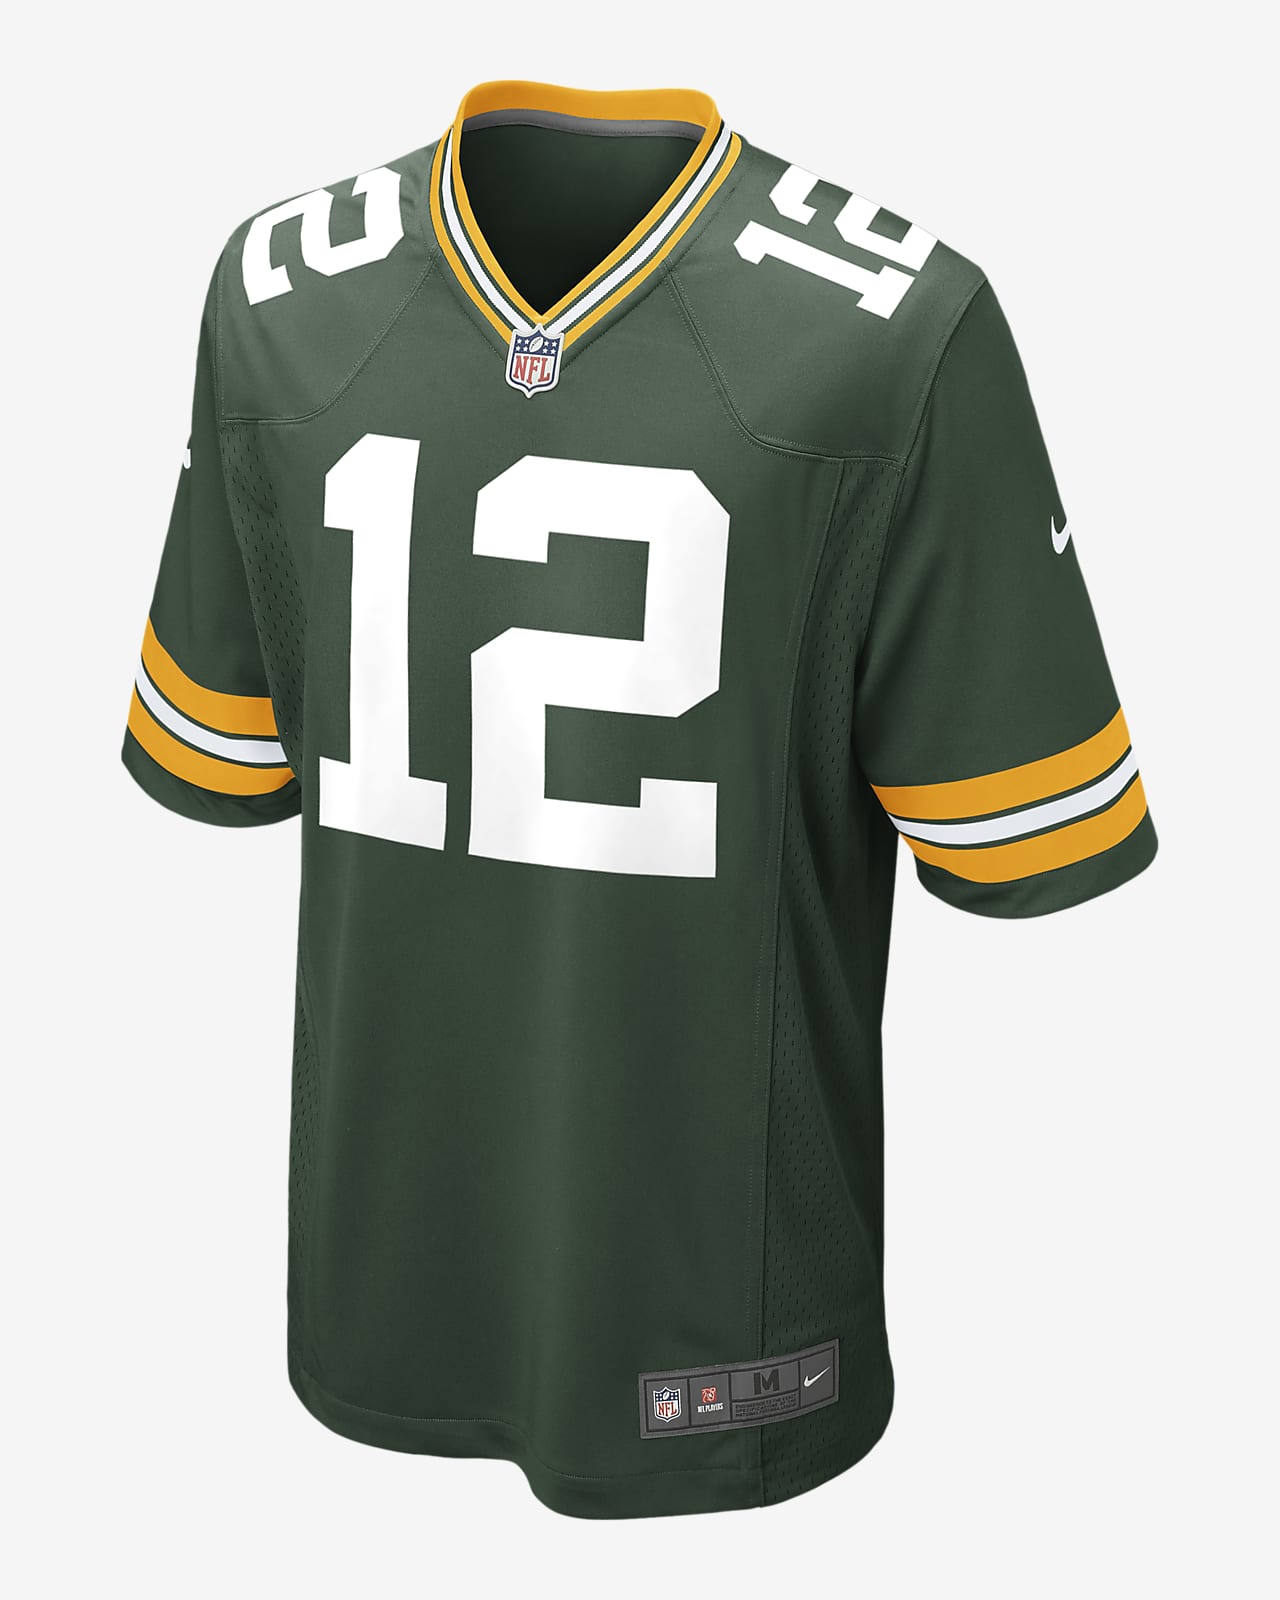 Maillot de football américain NFL Green Bay Packers (Aaron Rodgers) pour homme